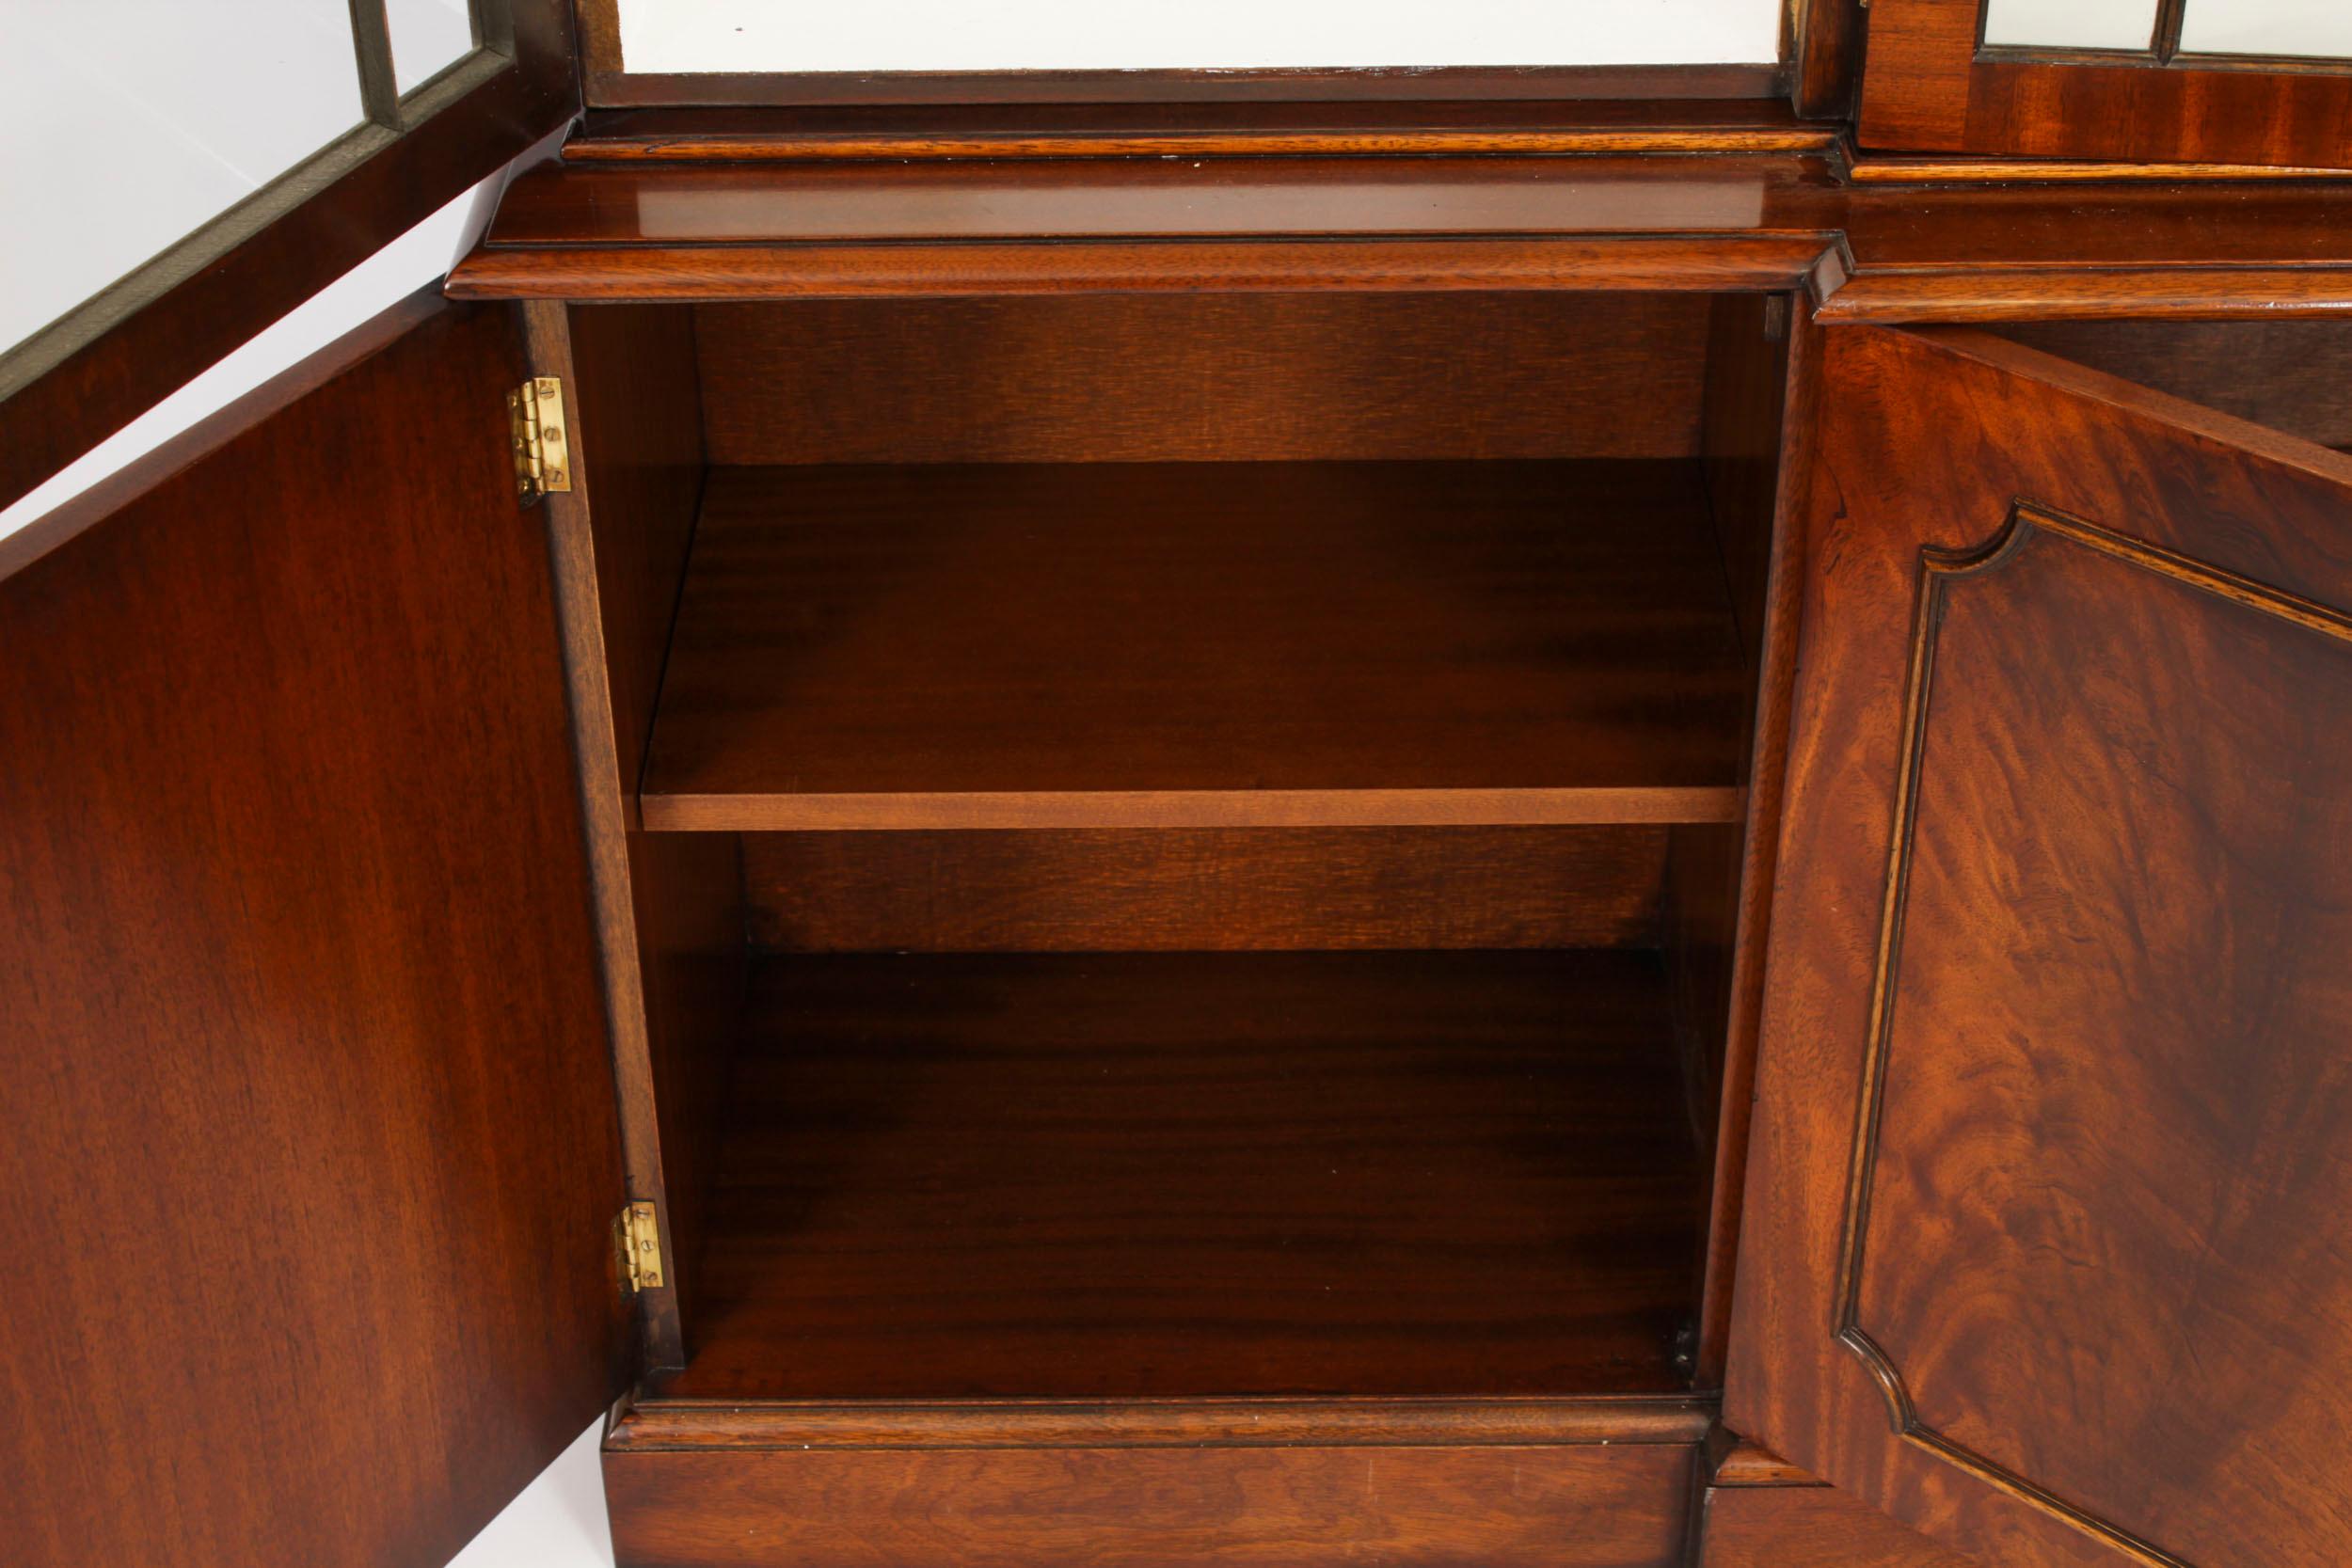 Vintage Georgian Revival Flame Mahogany Breakfront Bookcase 20th Century For Sale 12